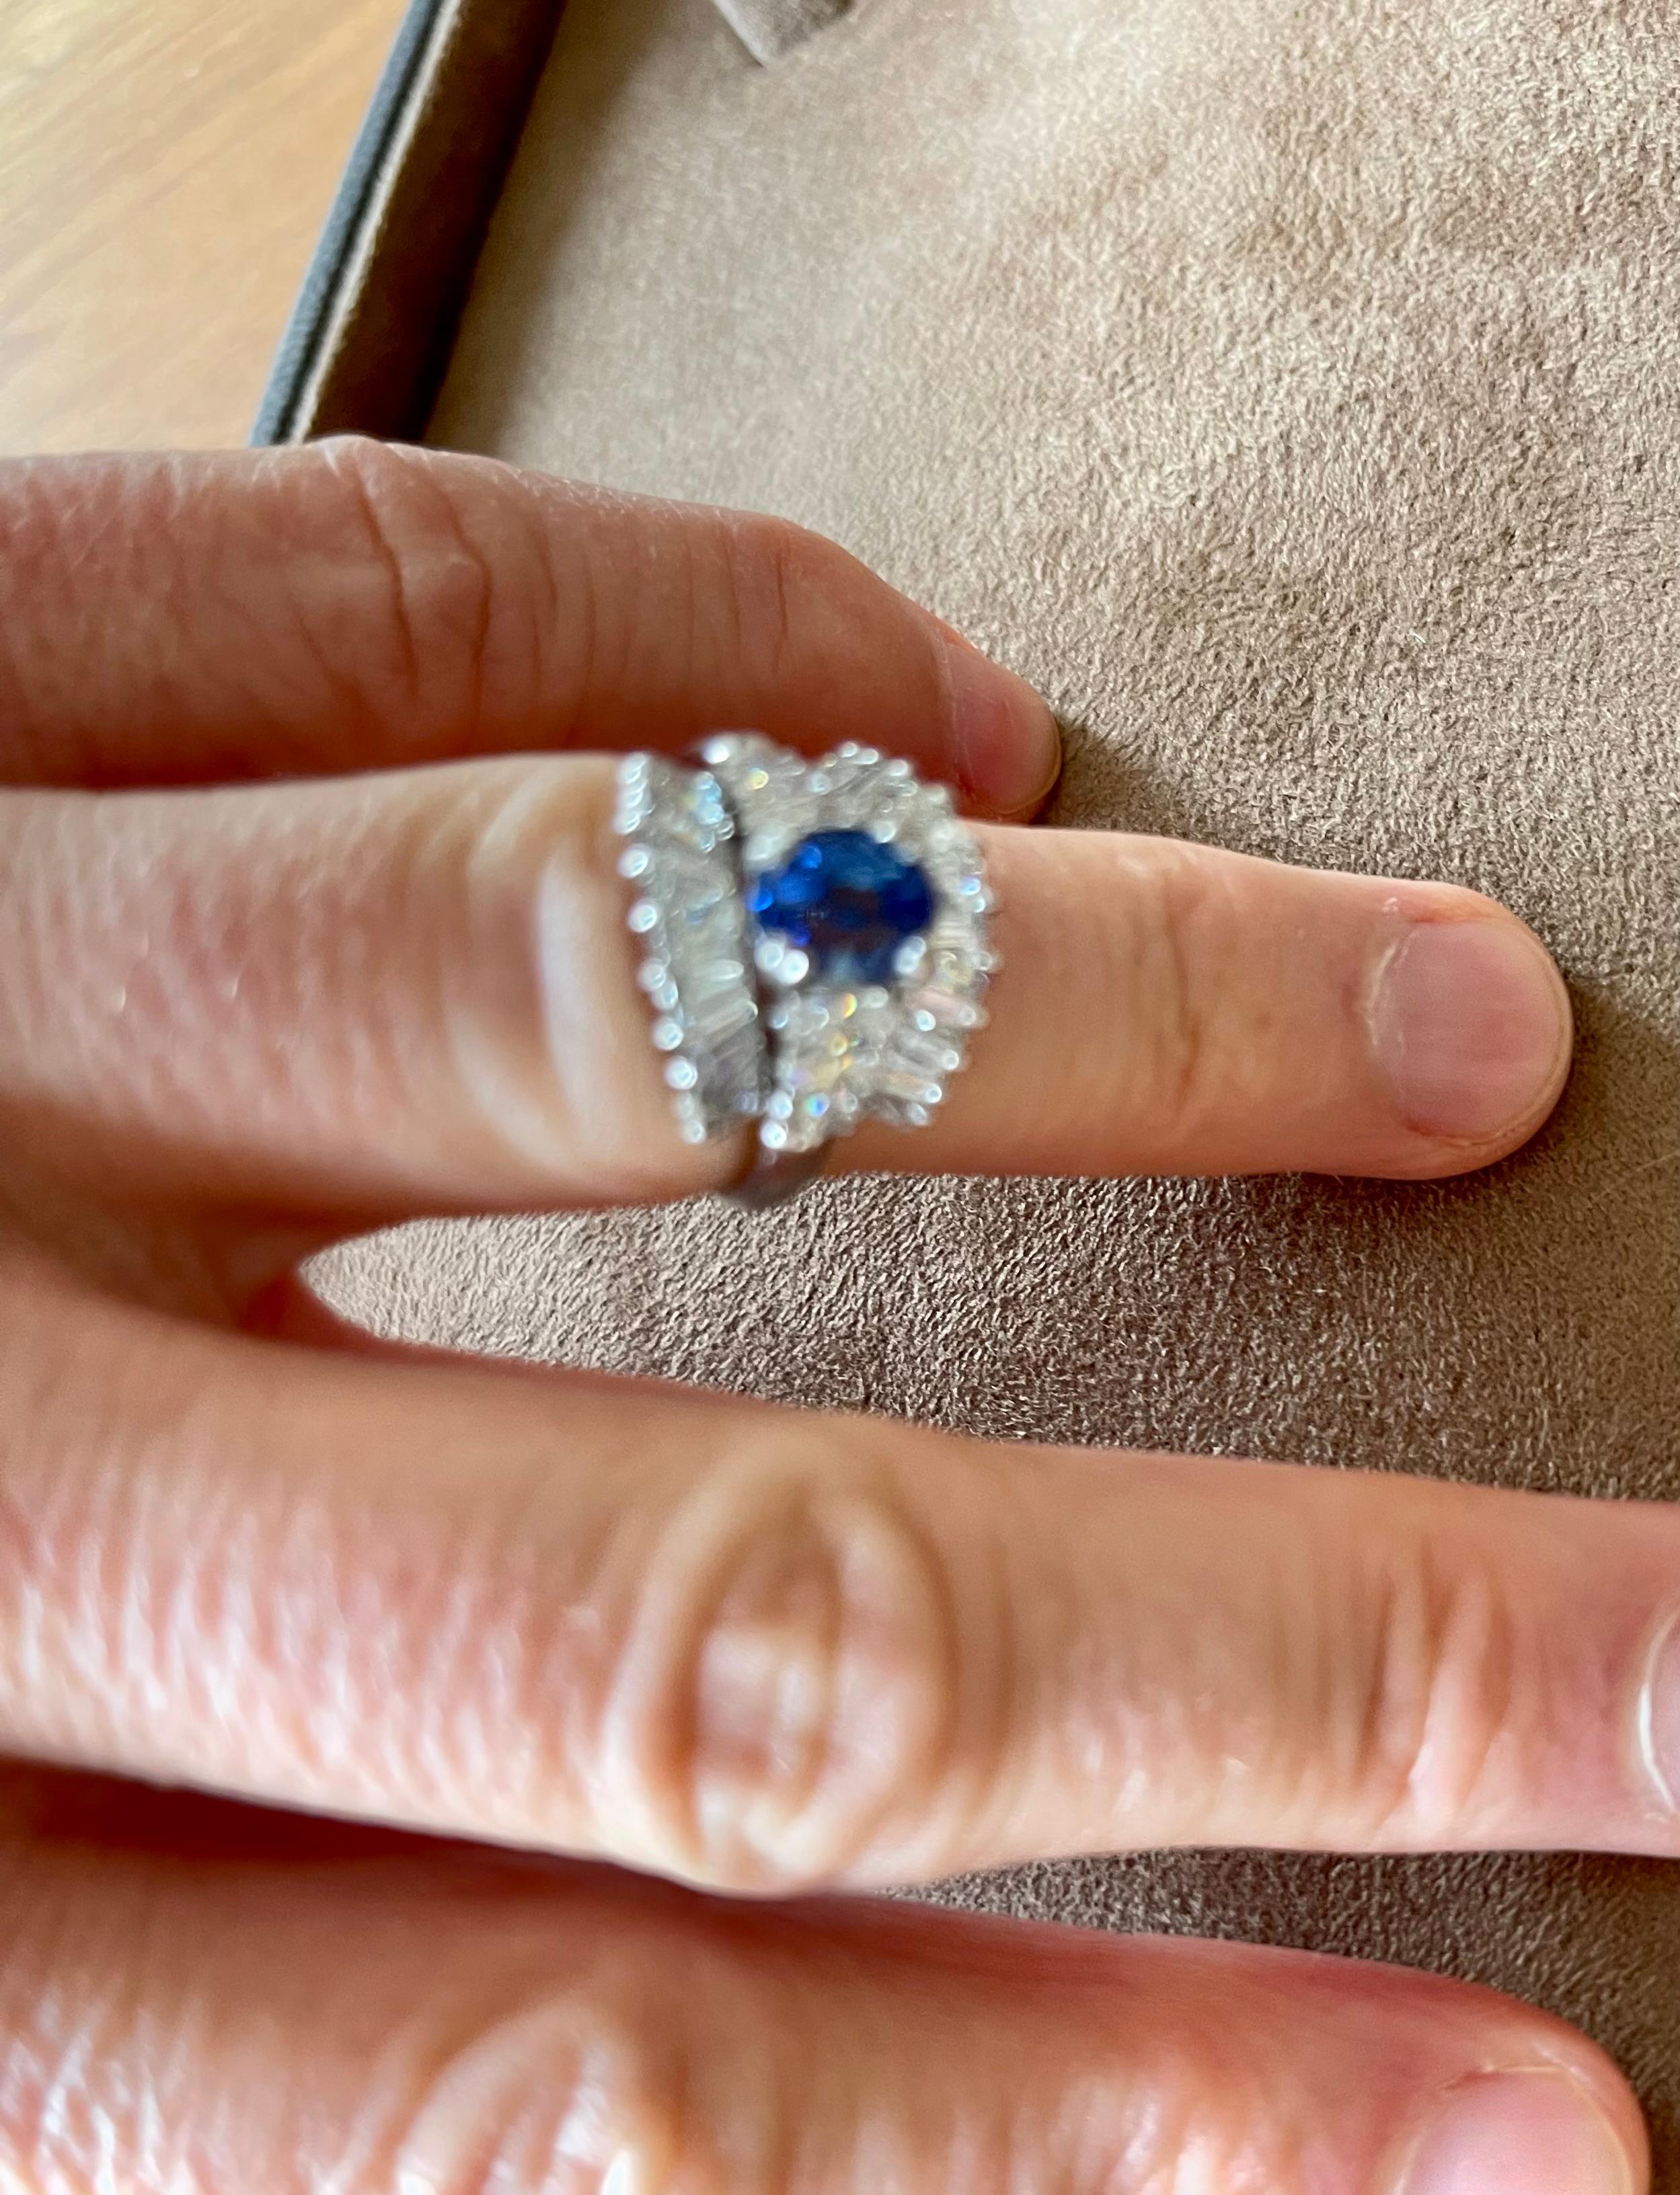 Beautriful and timeless Platinum 950 Cocktail Ring featuring 1 fine cornflower blue Ceylon Sapphire weighing ca 1 ct, flanked by 3 marquise shape Diamonds on each side weighing approximately 0.5 ct and 22 tapered baguette Diamonds weighing